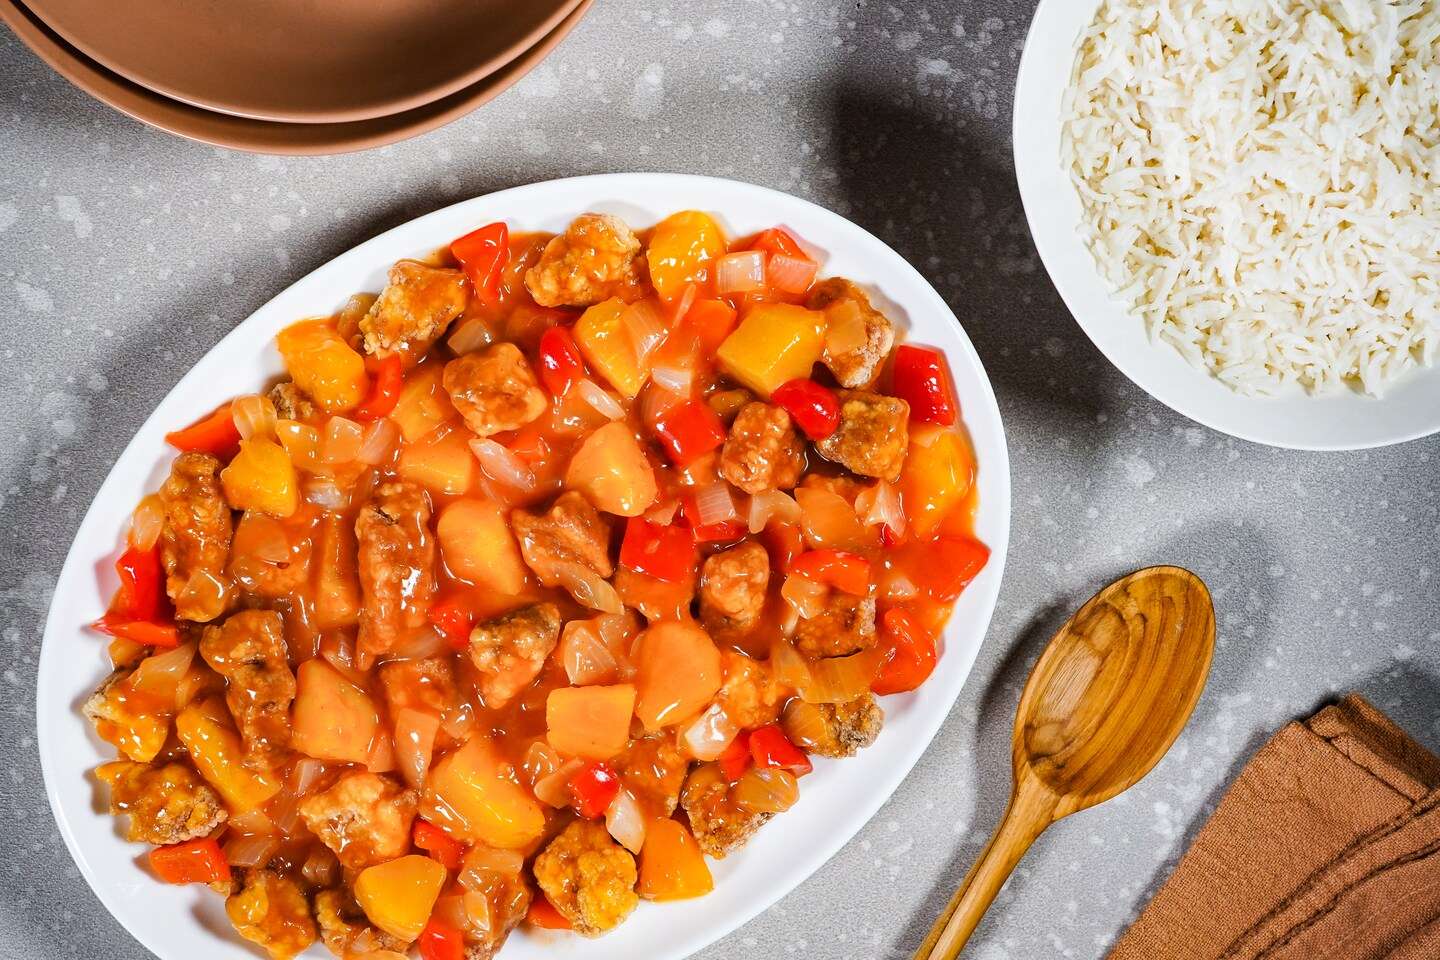 Sweet and sour pork brings a takeout favorite home